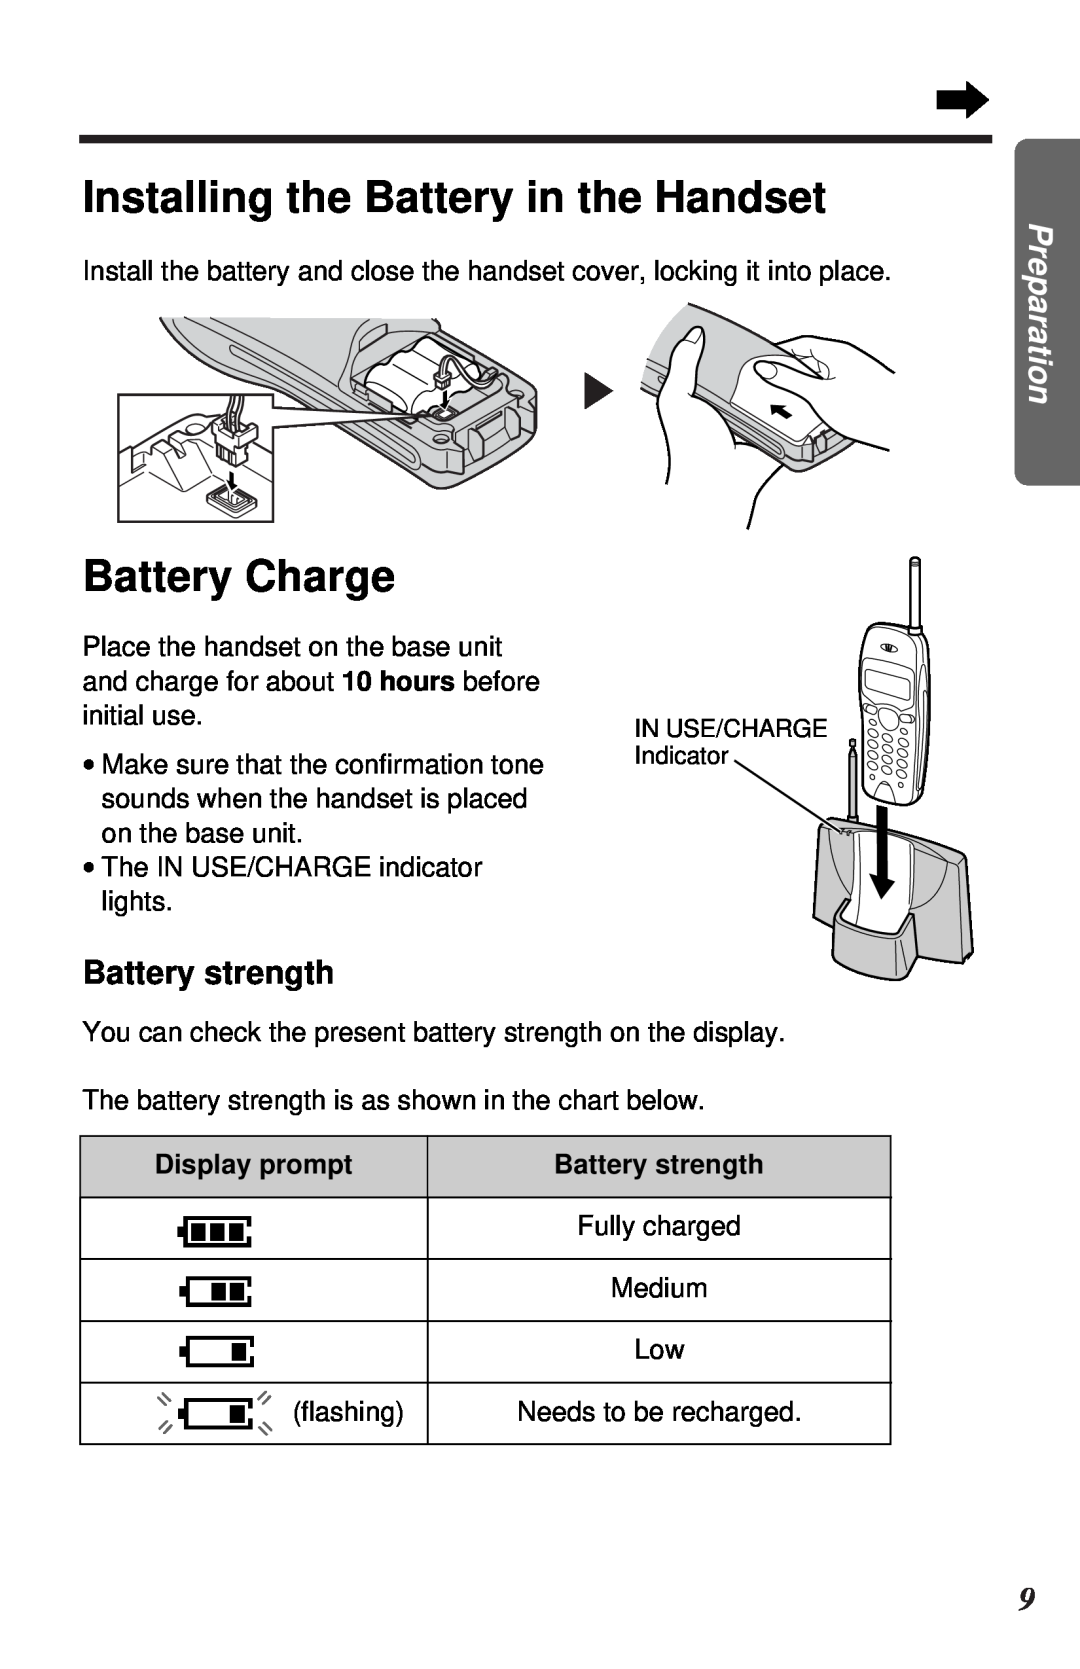 Panasonic KX-TC1105ALB, KX-TC1105ALN Installing the Battery in the Handset, Battery strength, Battery Charge, Preparation 